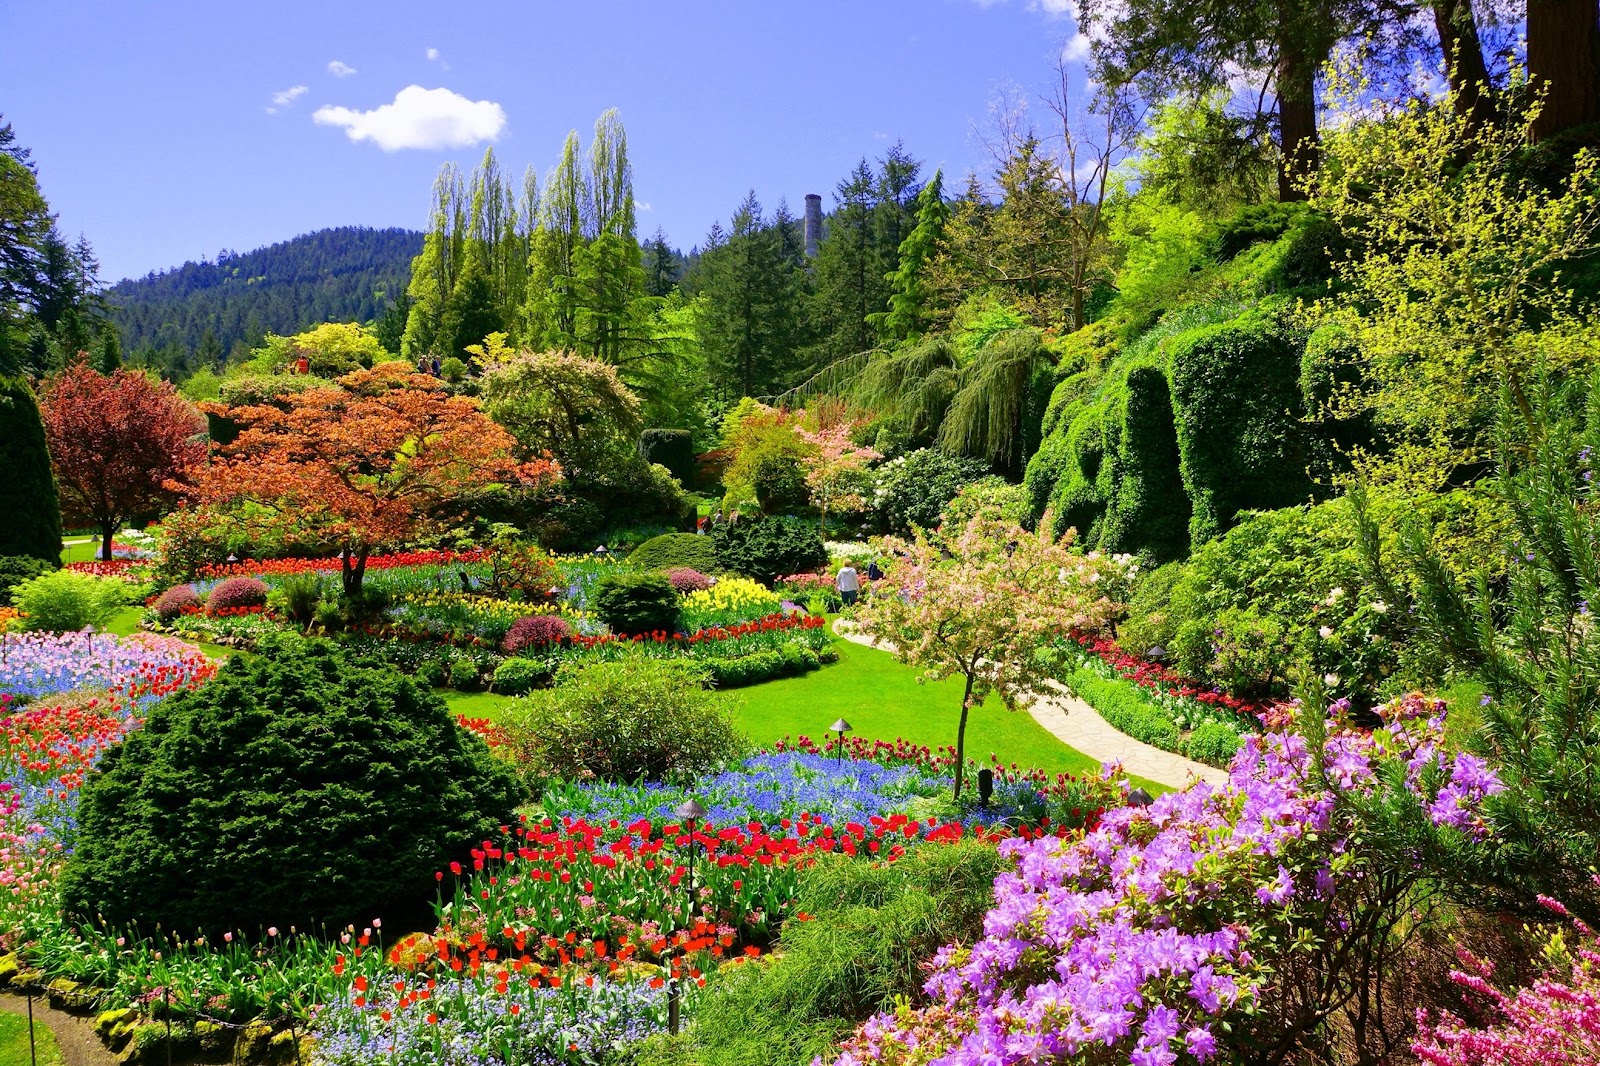 GARDEN VARIETY- Butchart Gardens in Brentwood Bay, Vancouver Island